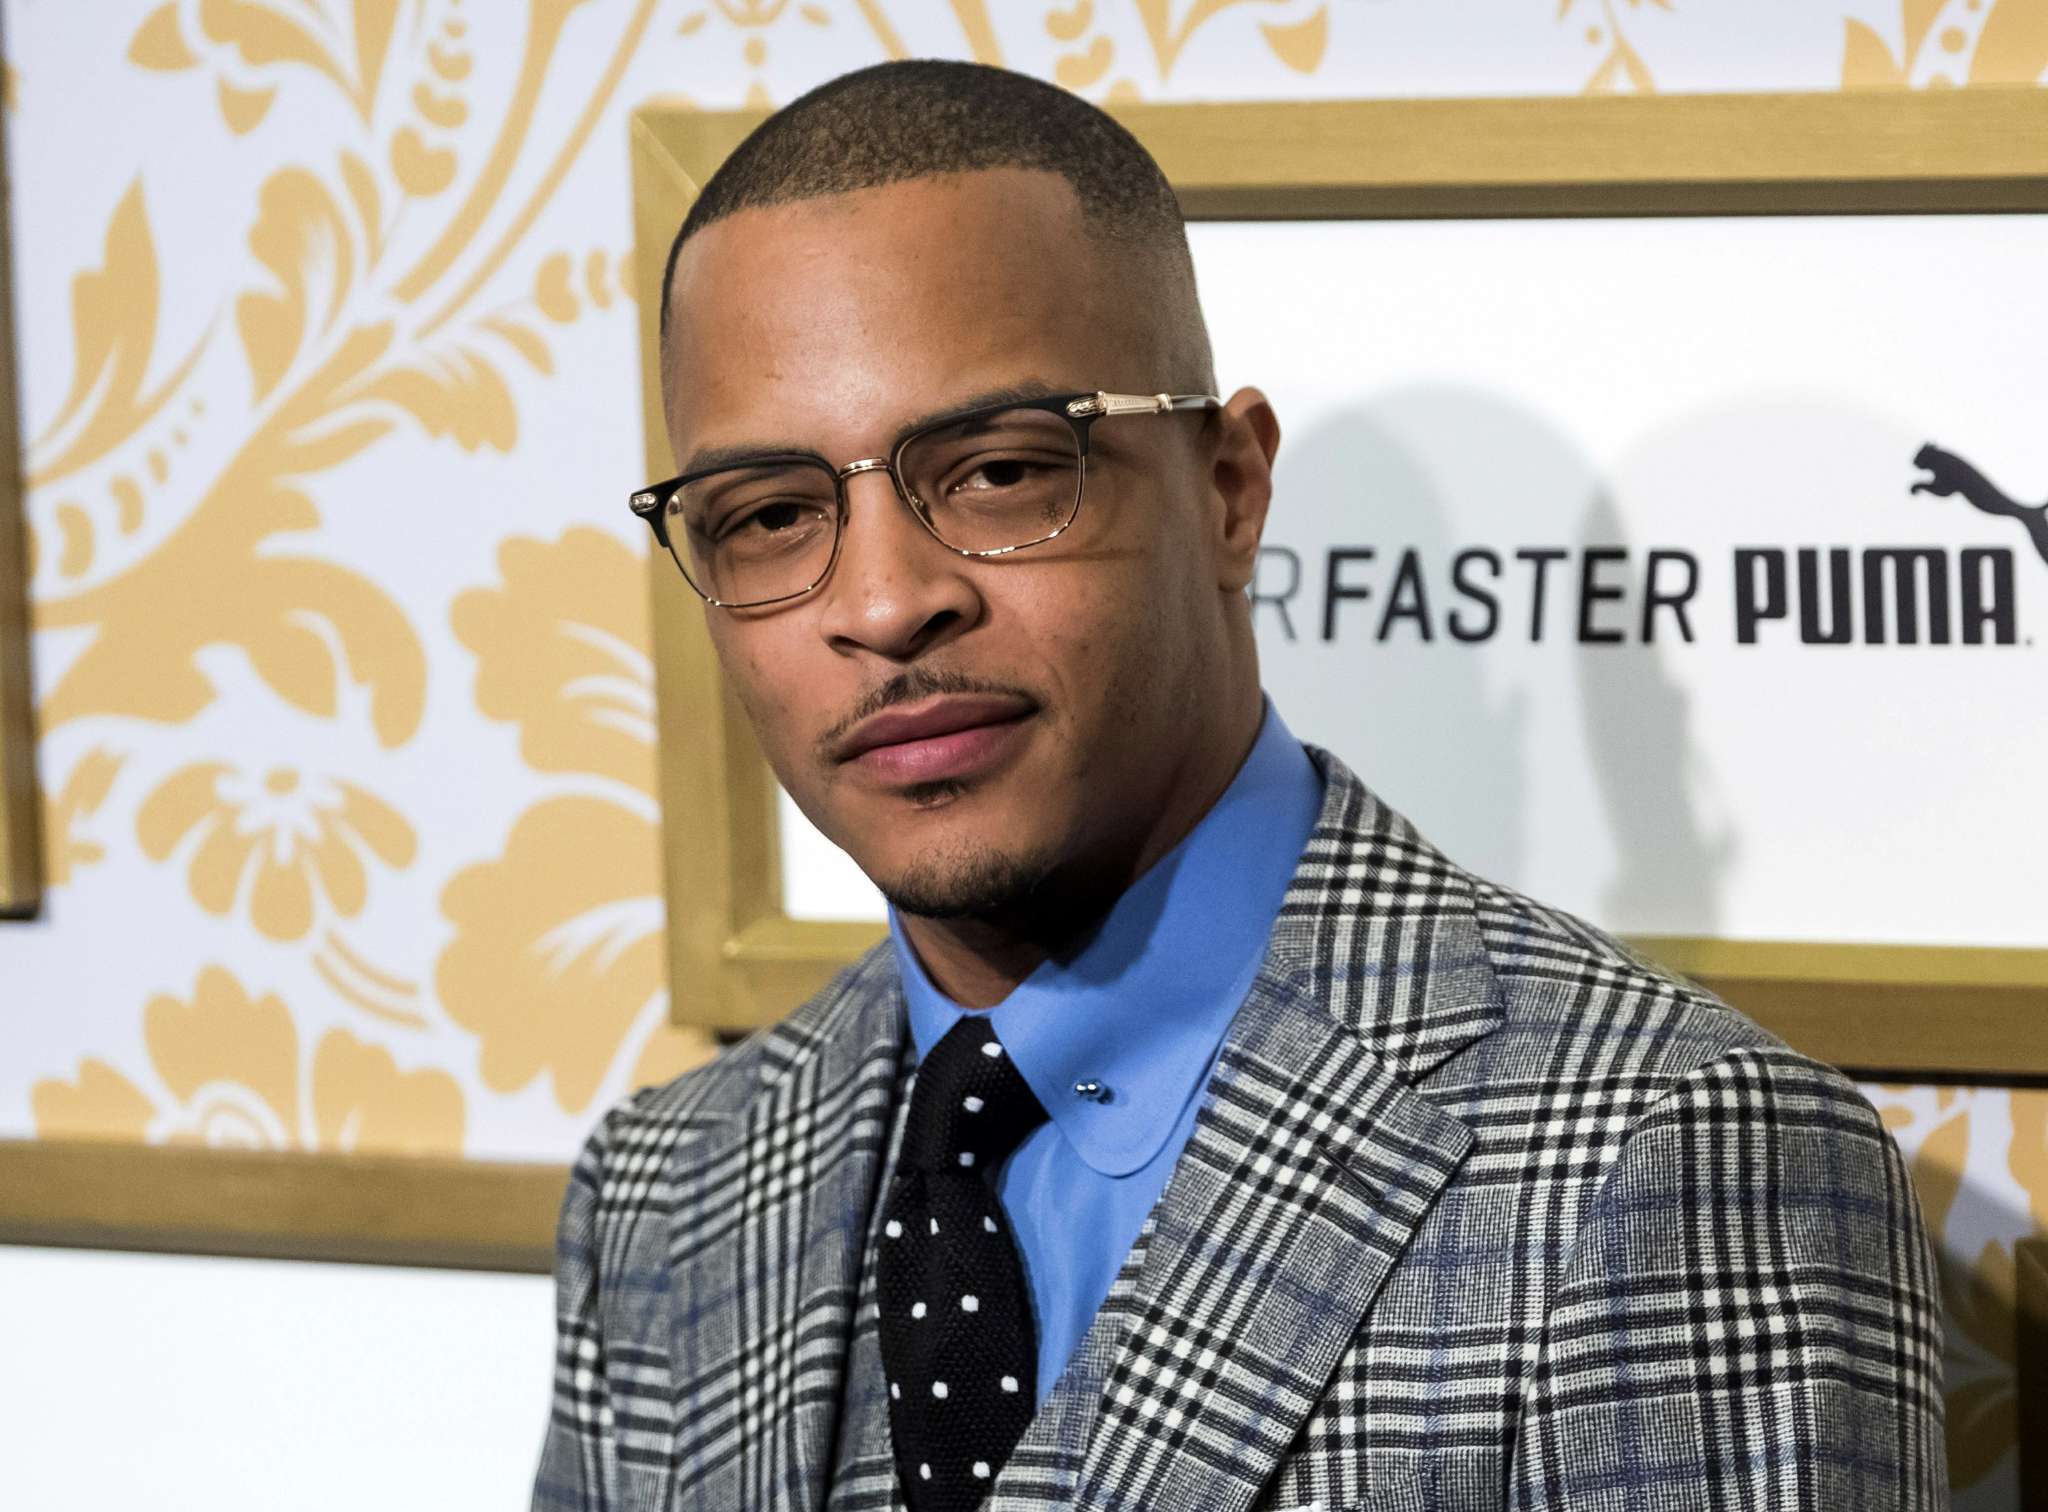 T.I. Has The Best Time With His Pals And Fans Appreciate The Great Company